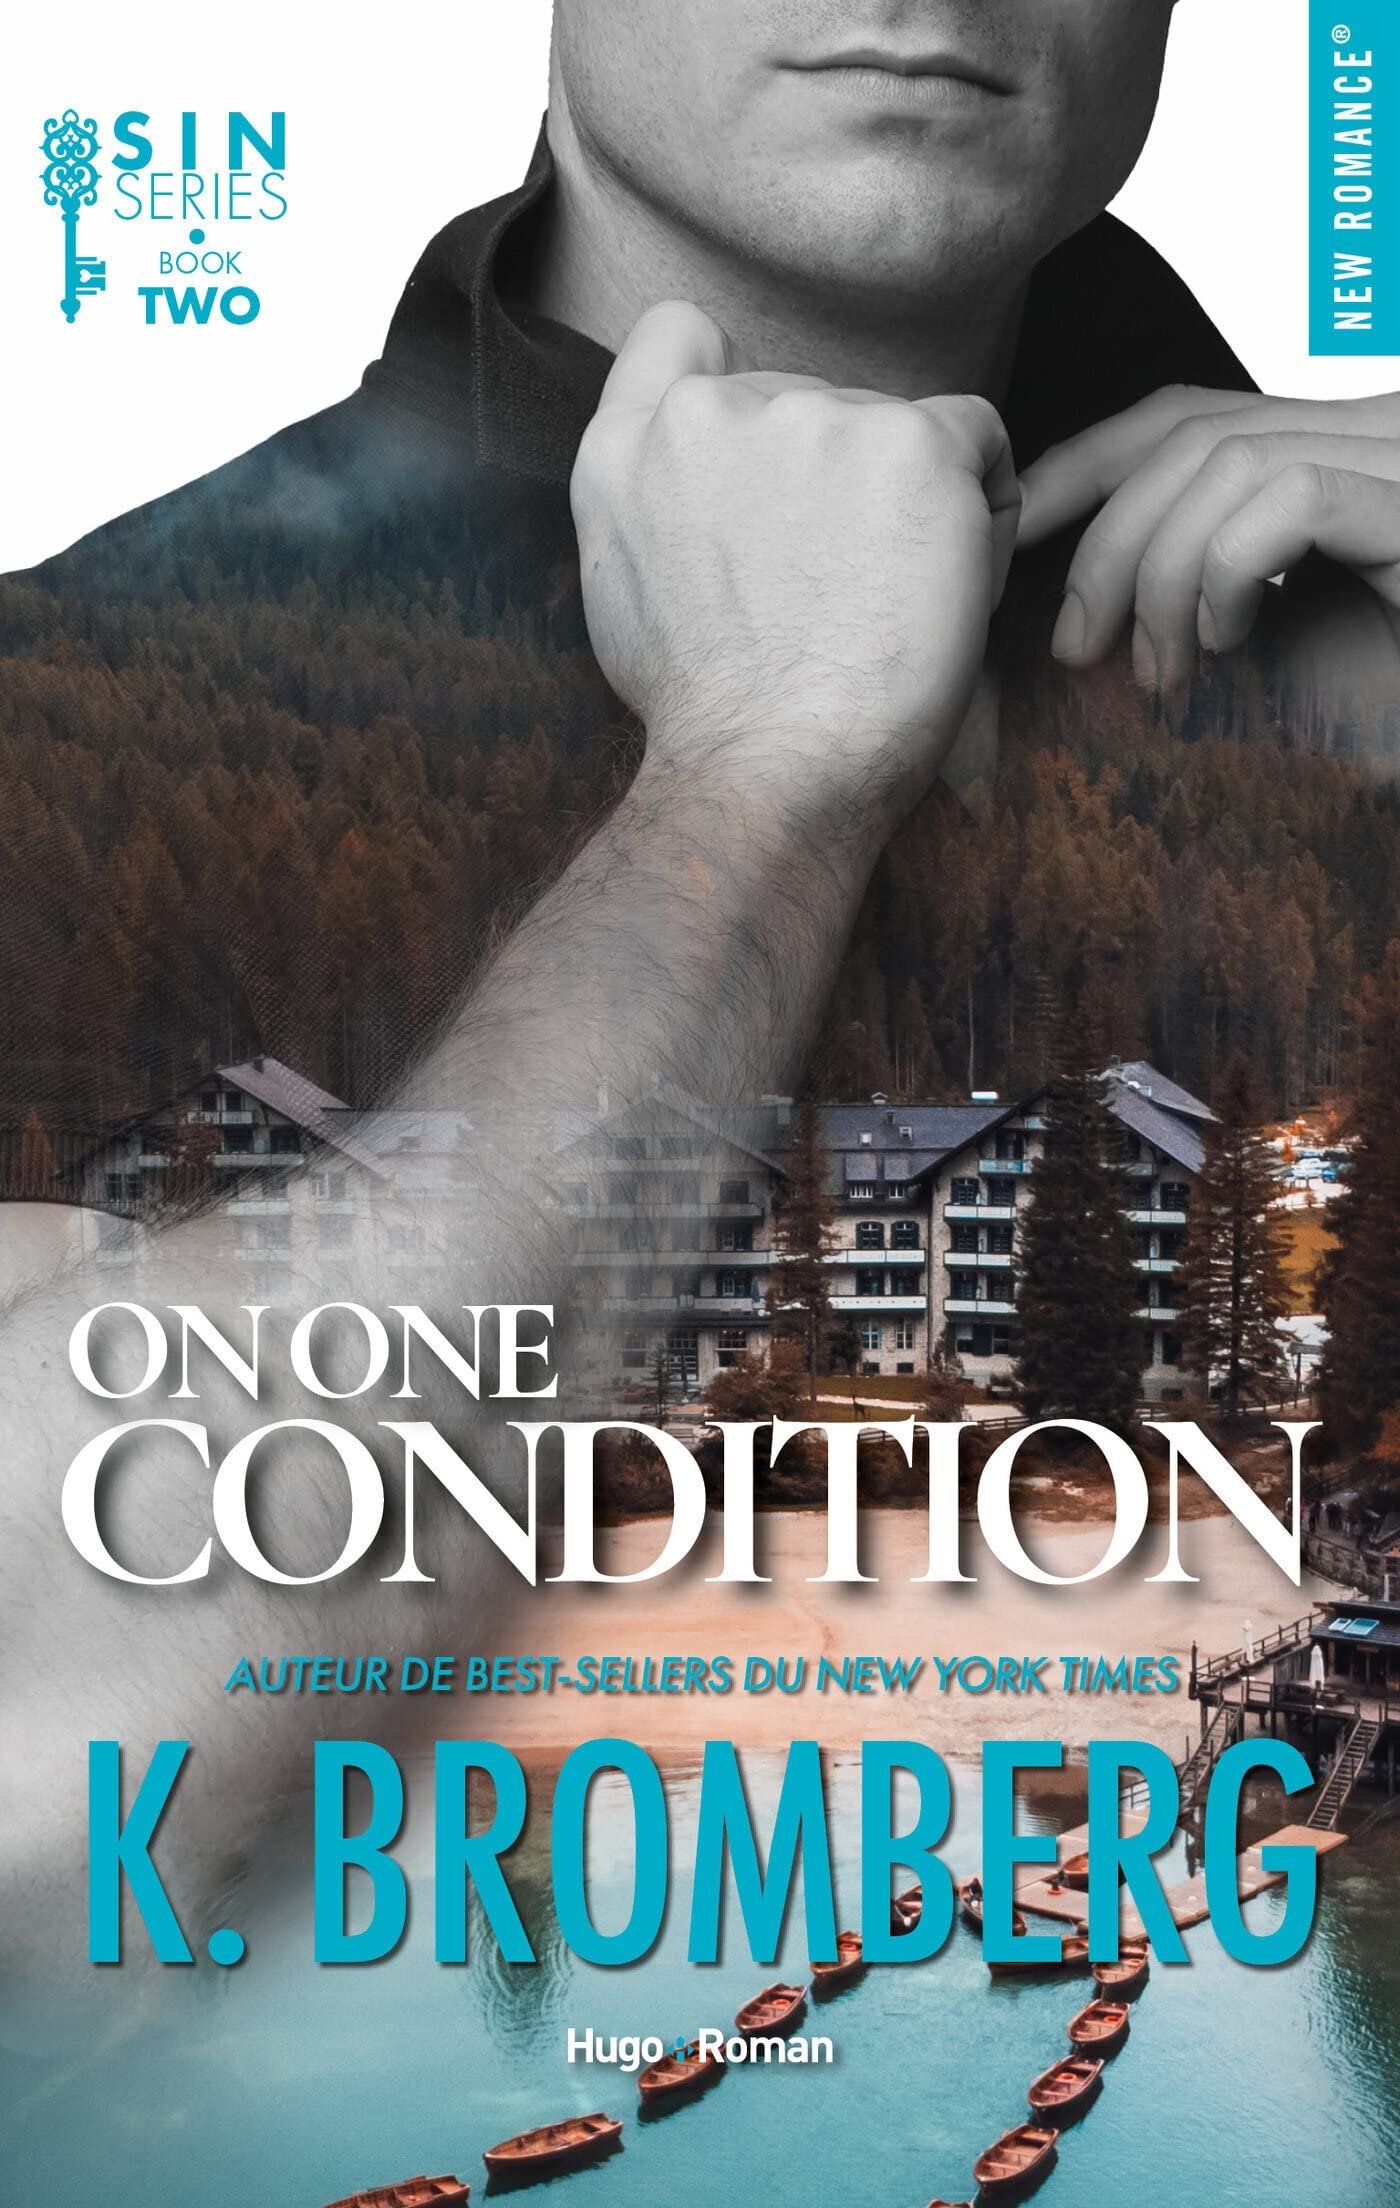 K. Bromberg – S.I.N., Tome 2 : On One Condition